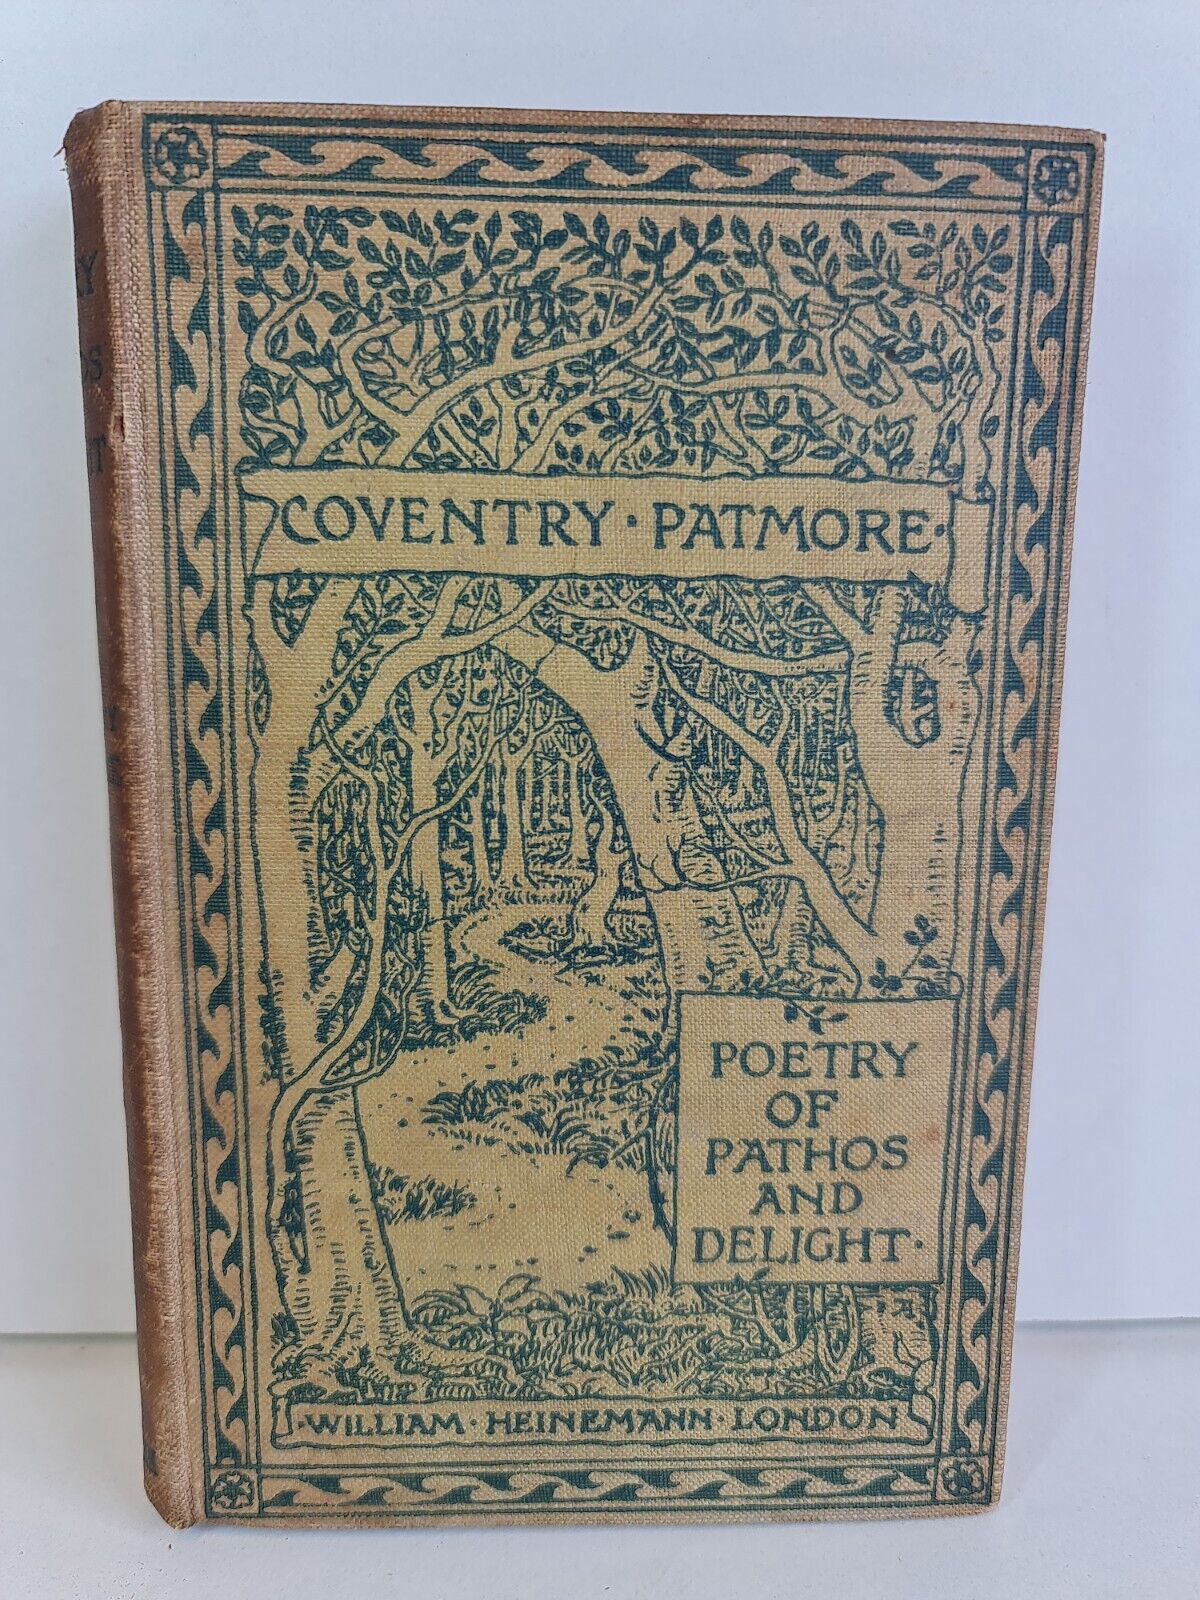 The Poetry of Pathos and Delight from the works of Coventry Patmore (1896)